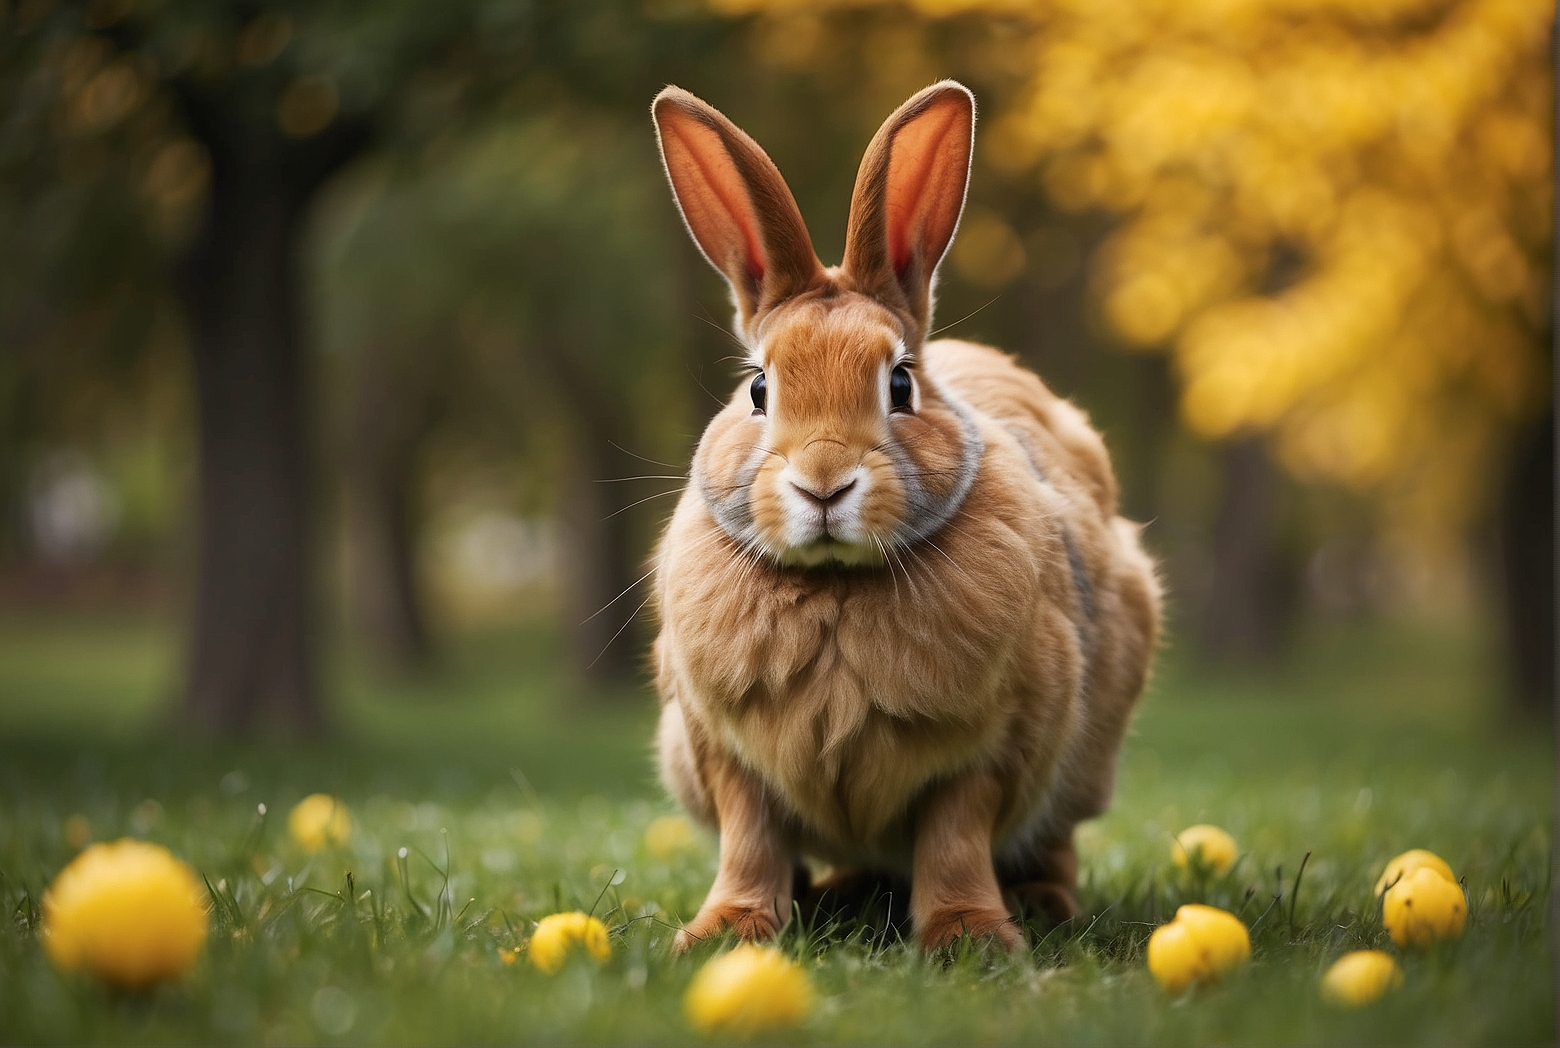 How to Care for a Flemish Giant: A Comprehensive Guide